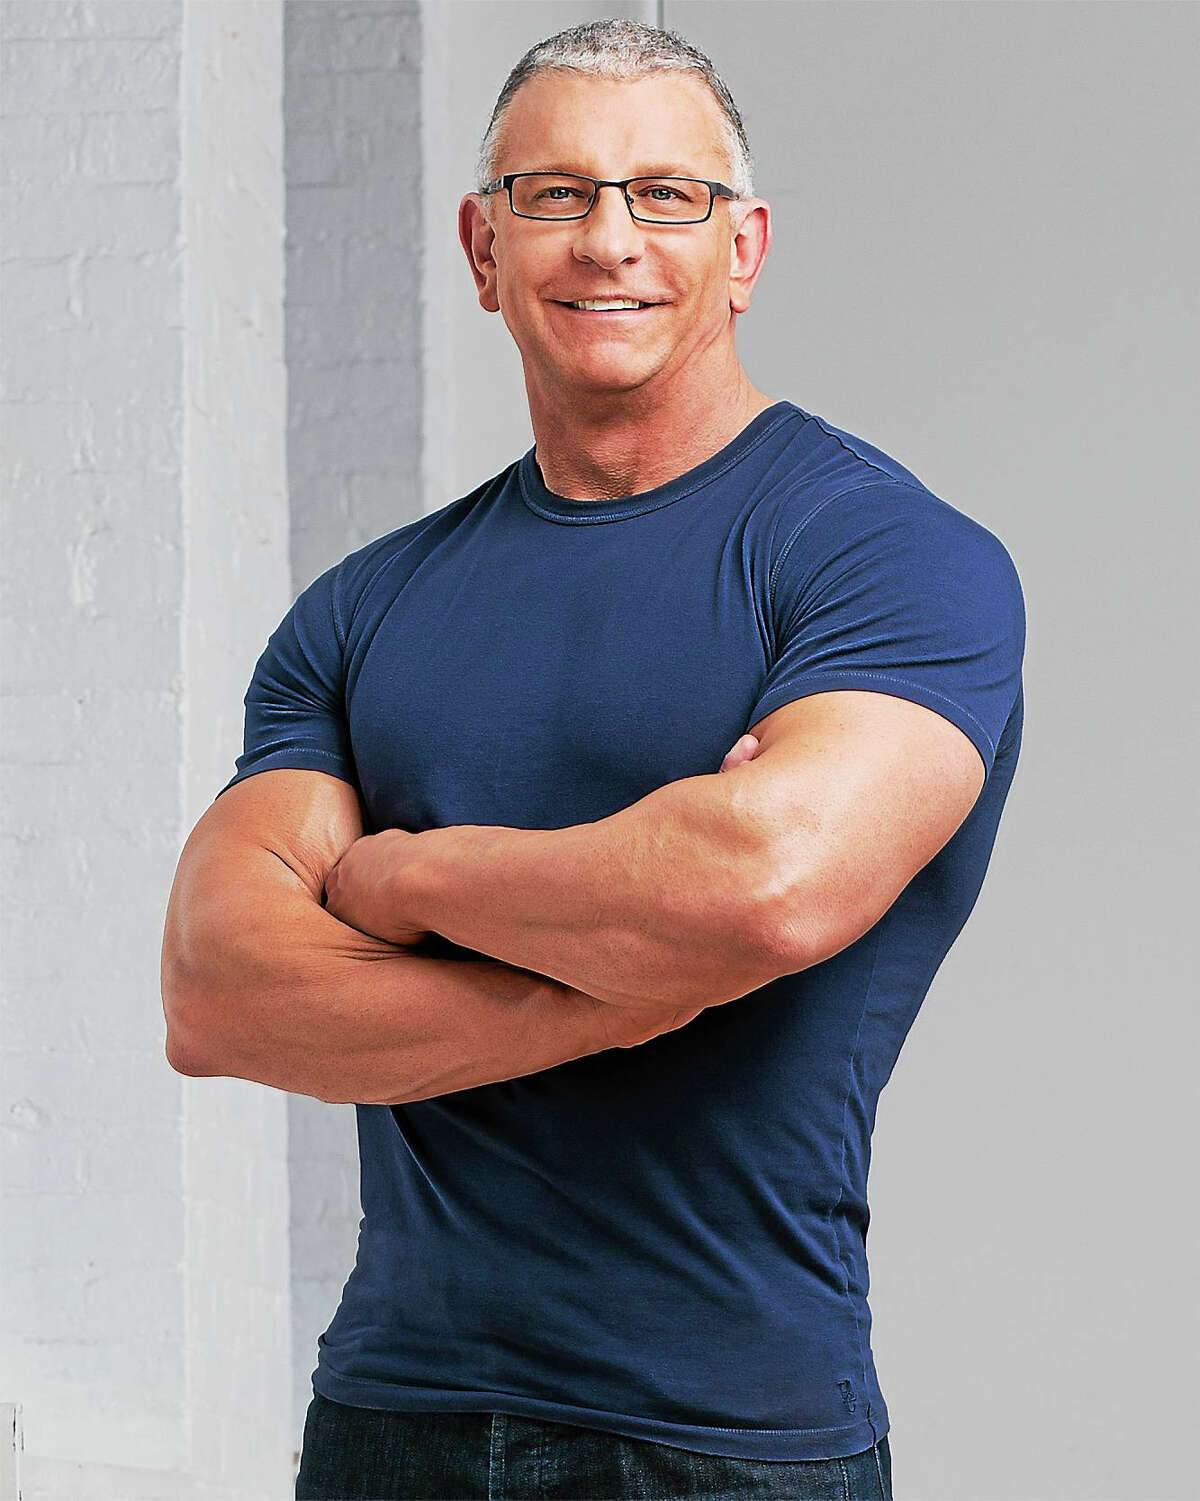 Contributed photoFood Network star Robert Irvine will share his experiences at the Palace Theater Dec. 4.